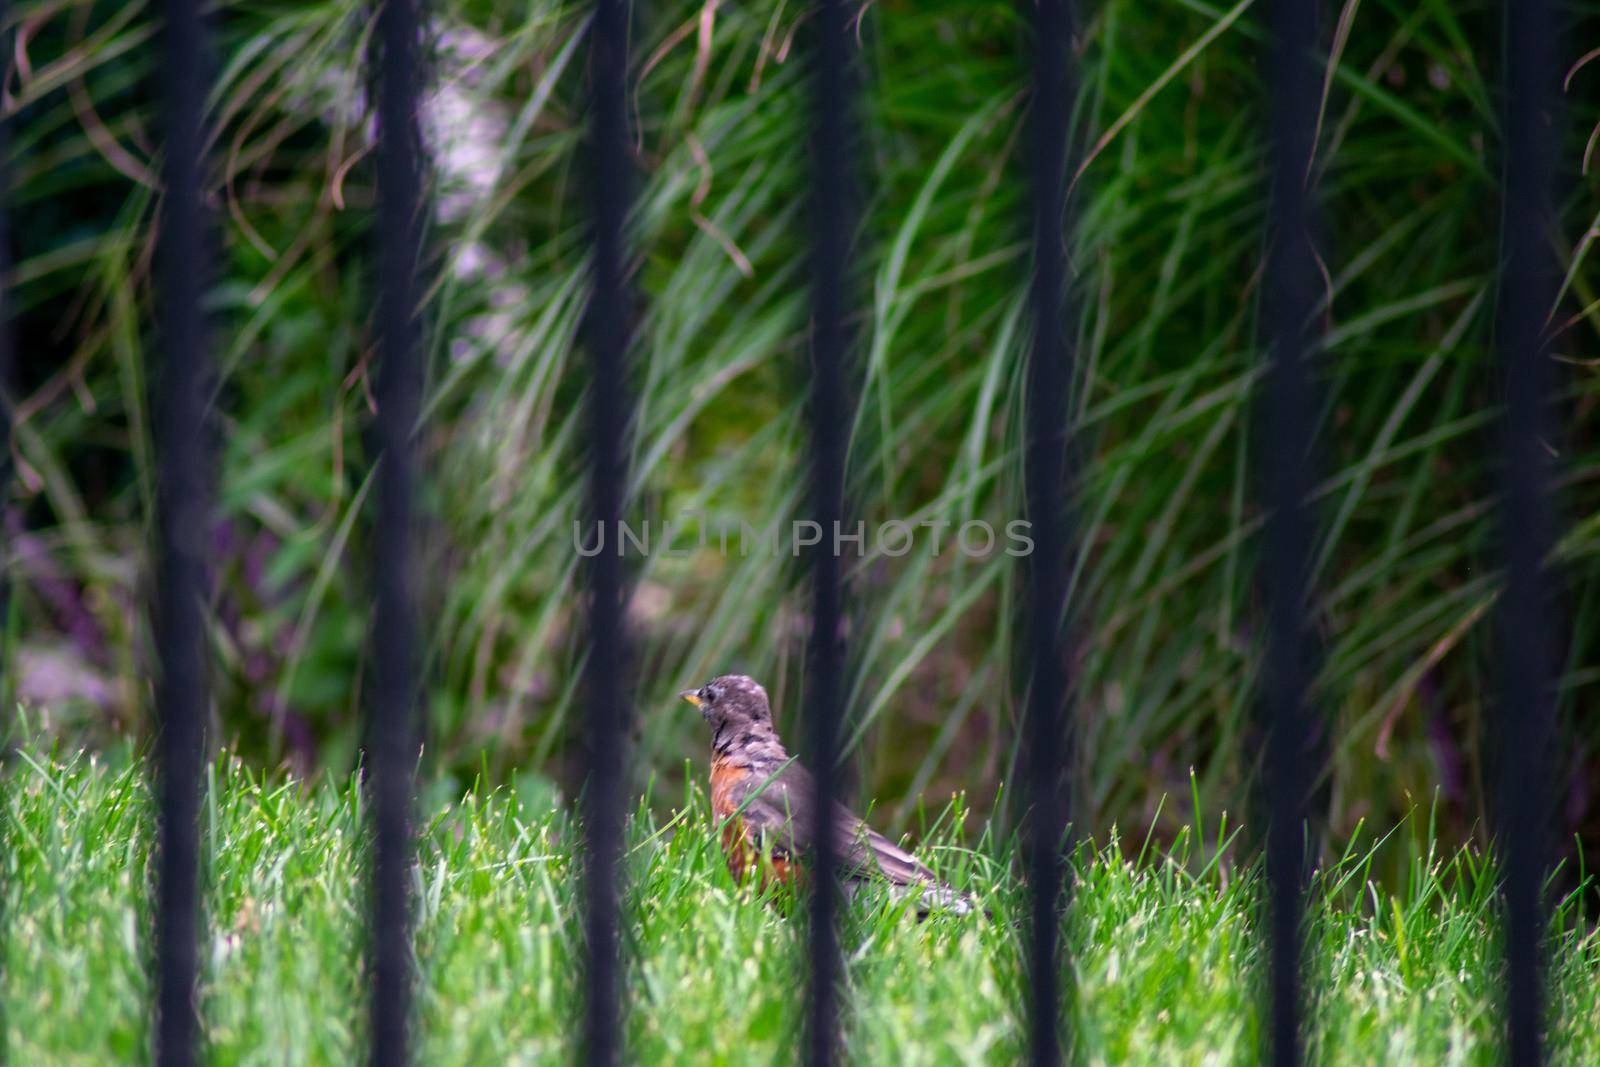 Looking Through a Black Metal Fence at an American Robine Standing in Bright Green Grass in a Backyard in Suburban Pennsylvania